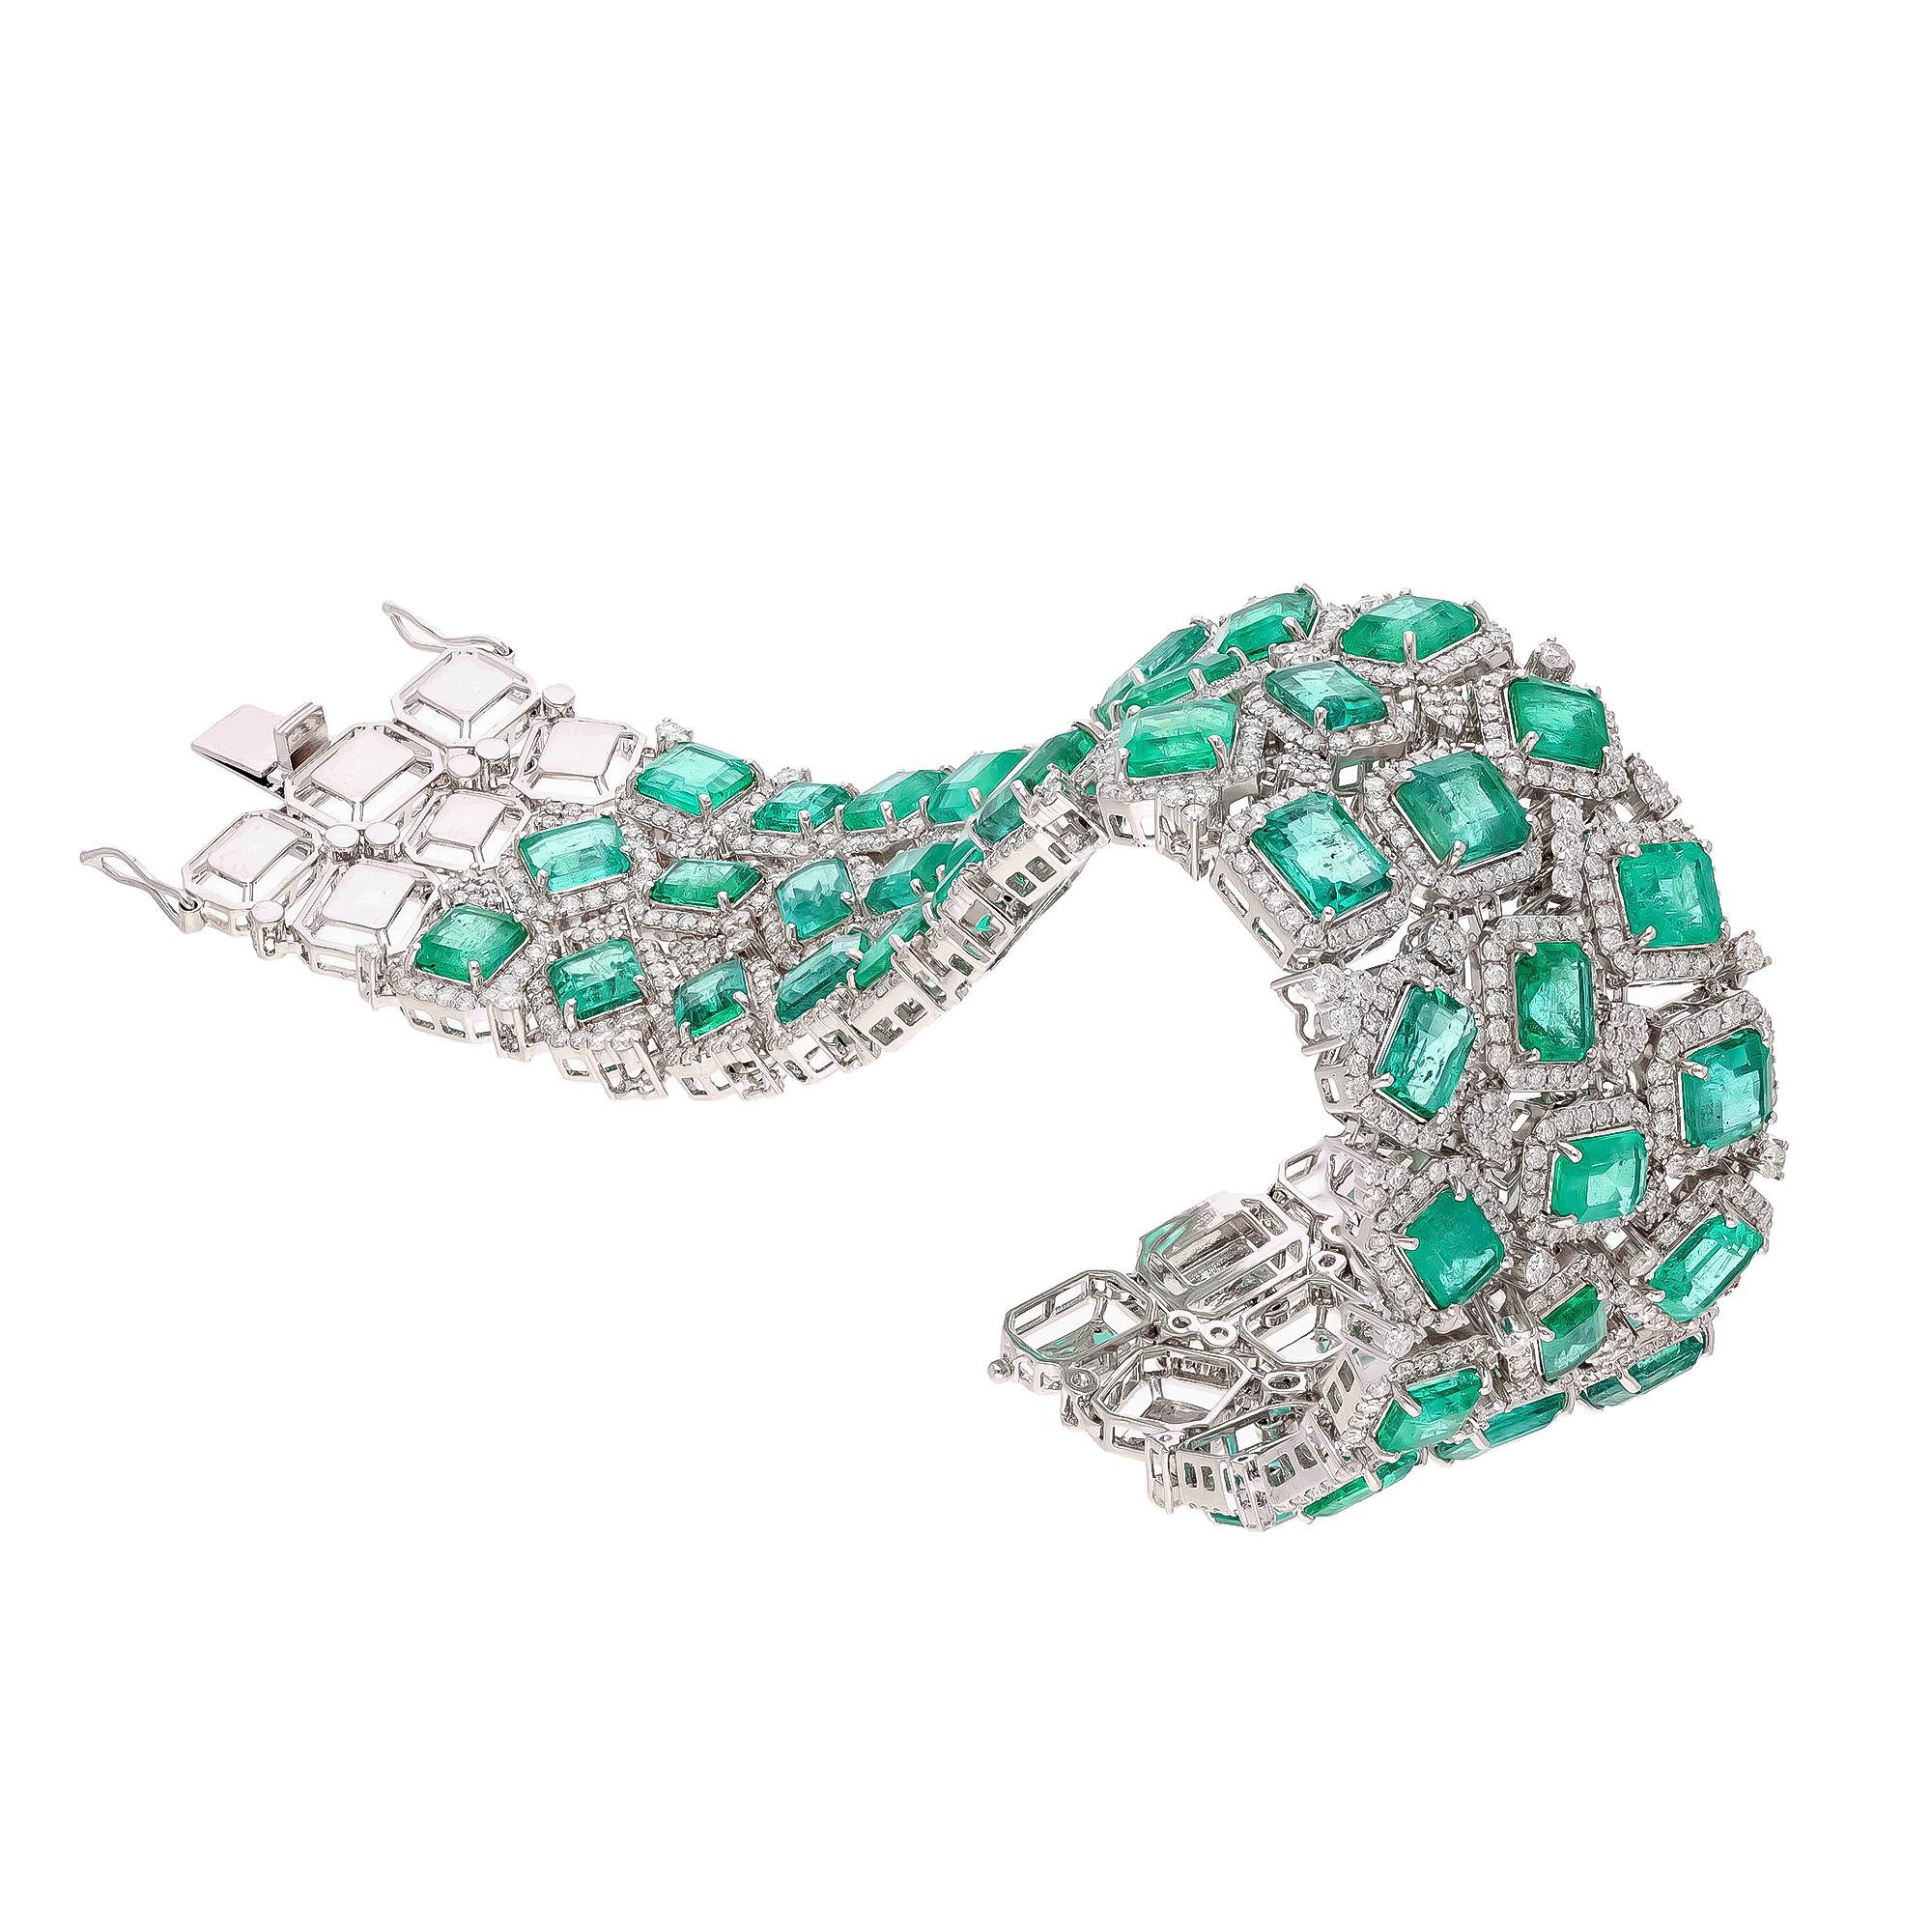 This is a natural Zambian Emerald bracelet with diamonds and 18k gold. The emeralds are very high quality and very good quality diamonds the clarity is vsi and G colour


Emeralds : 49.88 carats
diamonds : 10.83 carats
gold : 76.148 gms

This is a